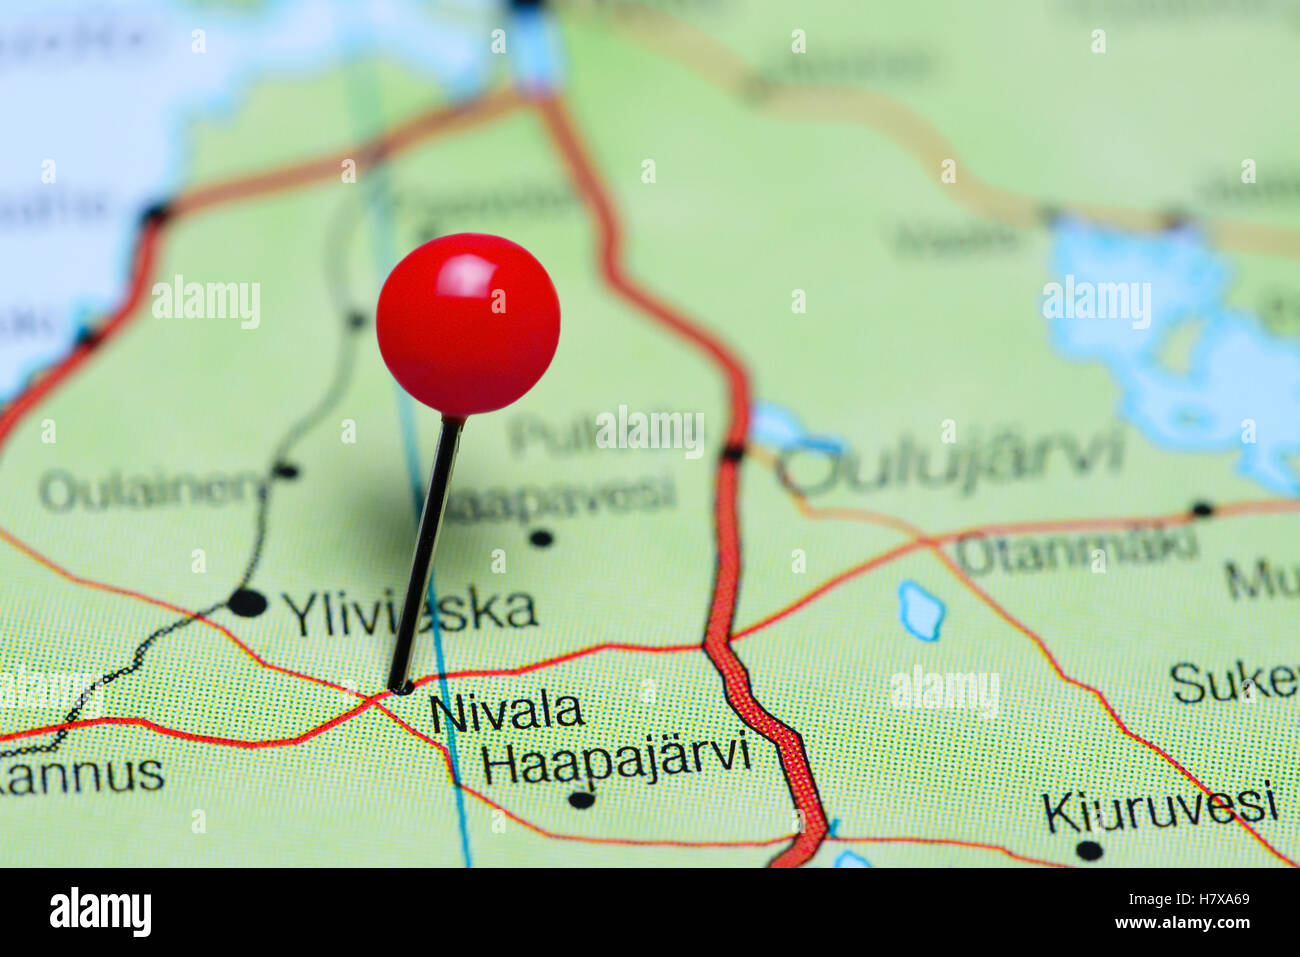 Nivala pinned on a map of Finland Stock Photo